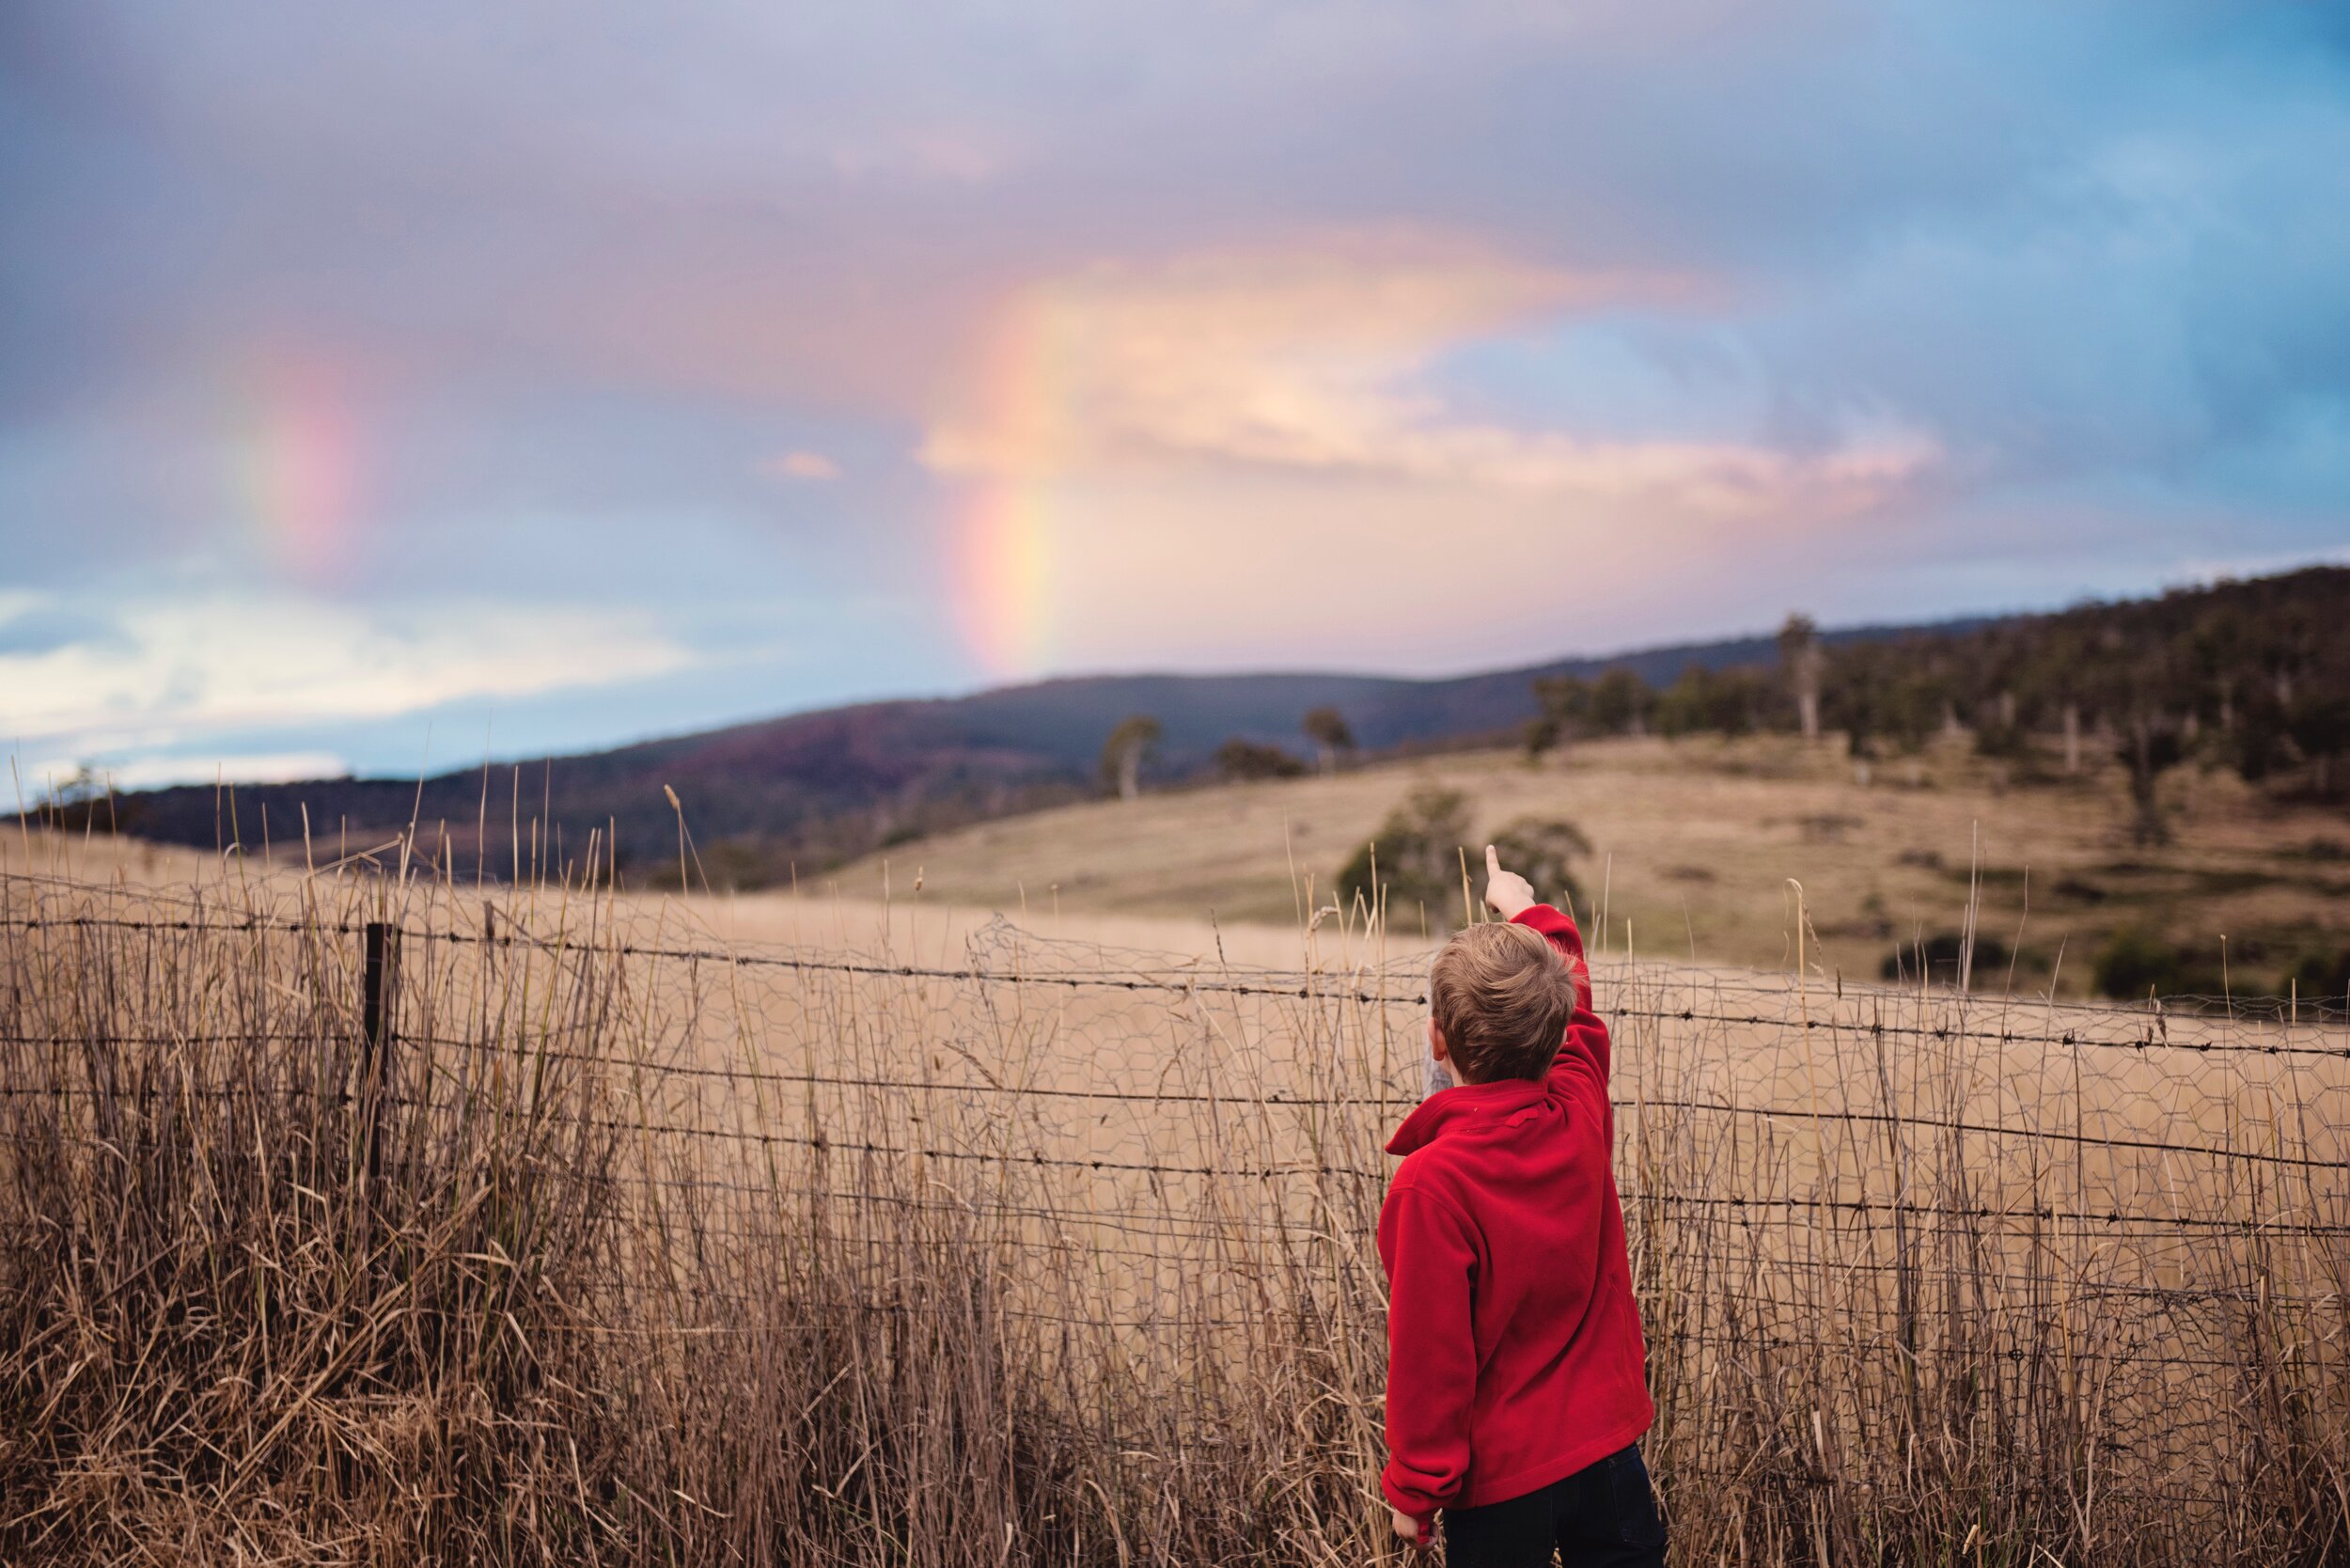 Our children quite literally embody the future. While they are full of wonder with all of the possibilities that the future holds, we can do things now that will help them prepare for handling their own finances when they become an adult.